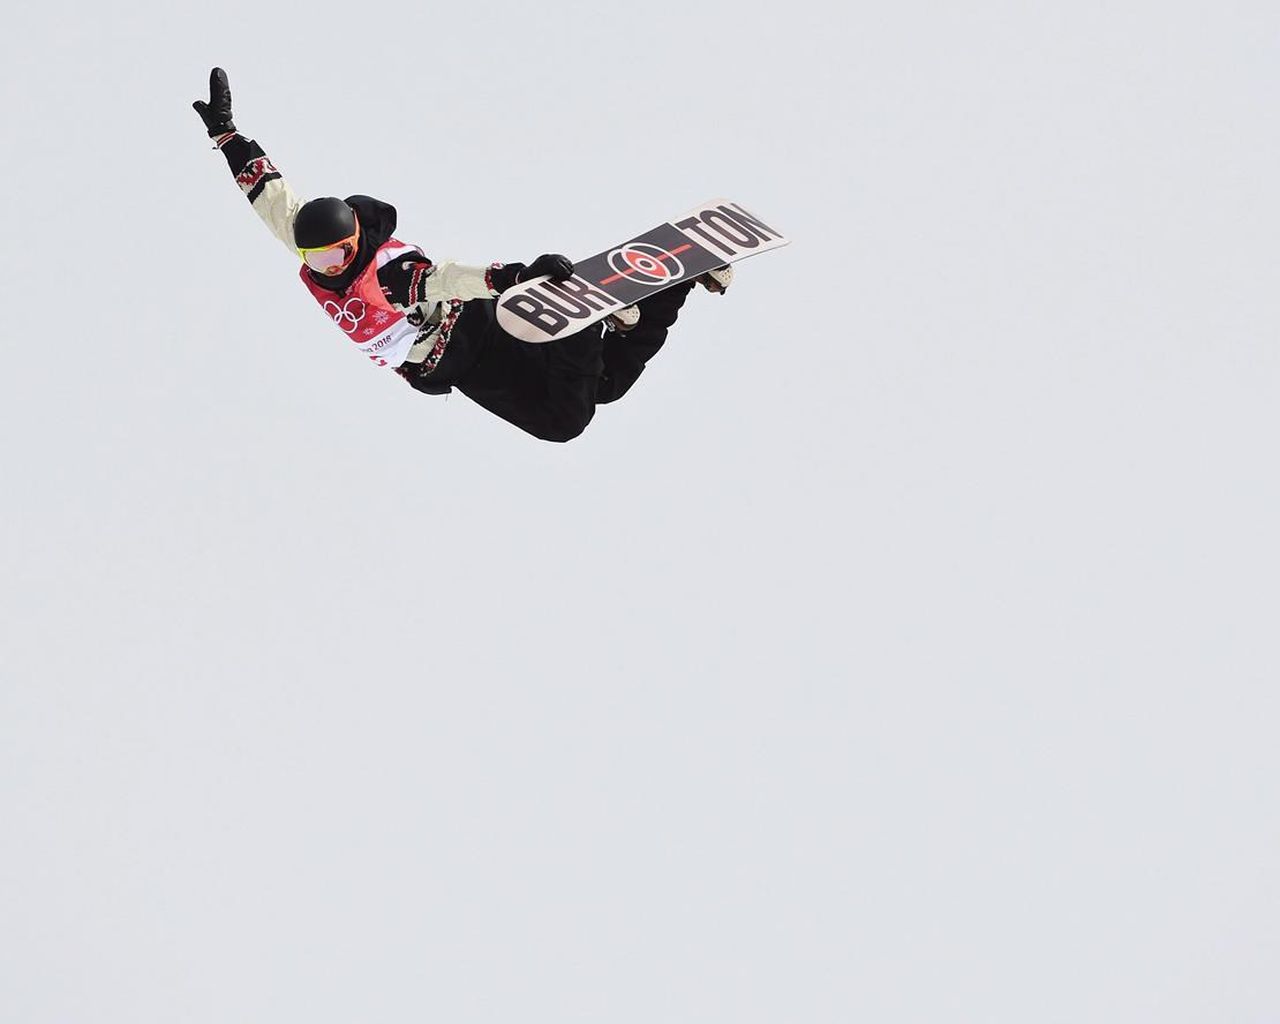 Canadian Snowboarder Mark Mcmorris Back On Podium In Aspen The Star